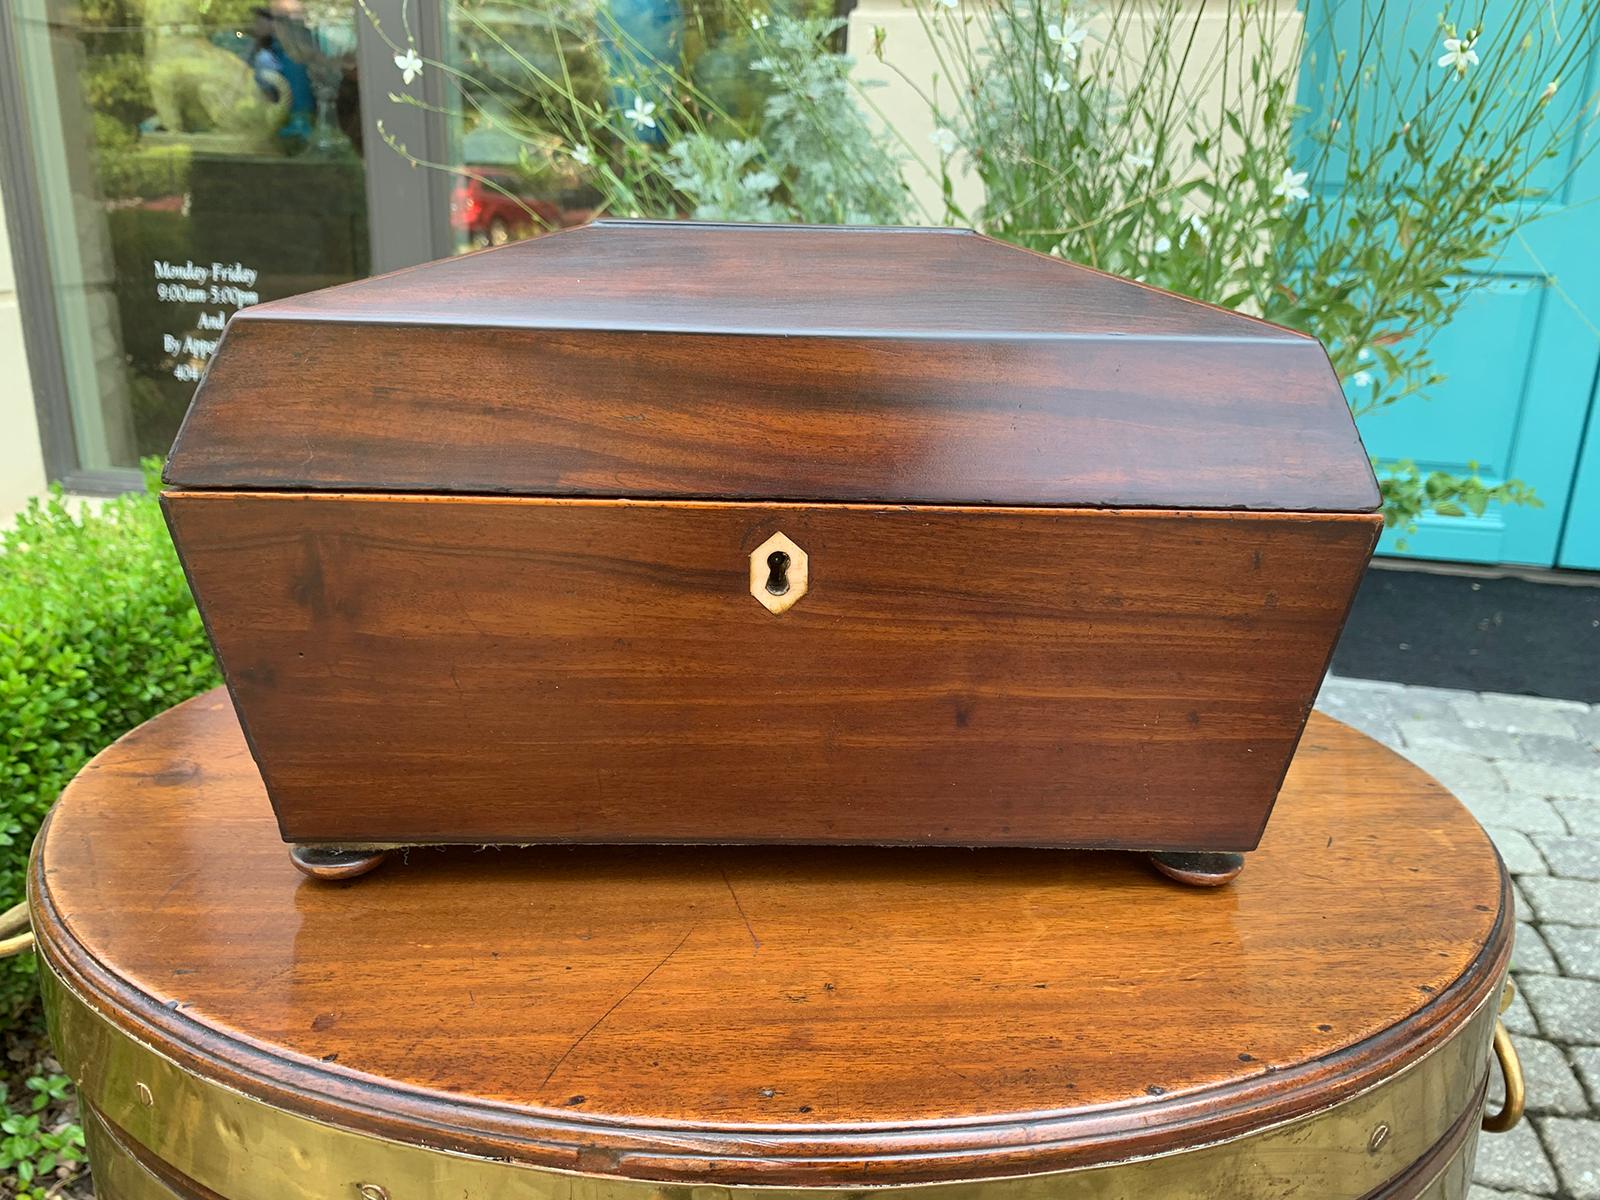 19th century English inlaid tea caddy with crystal Rinser bowl
Rosewood or mahogany.